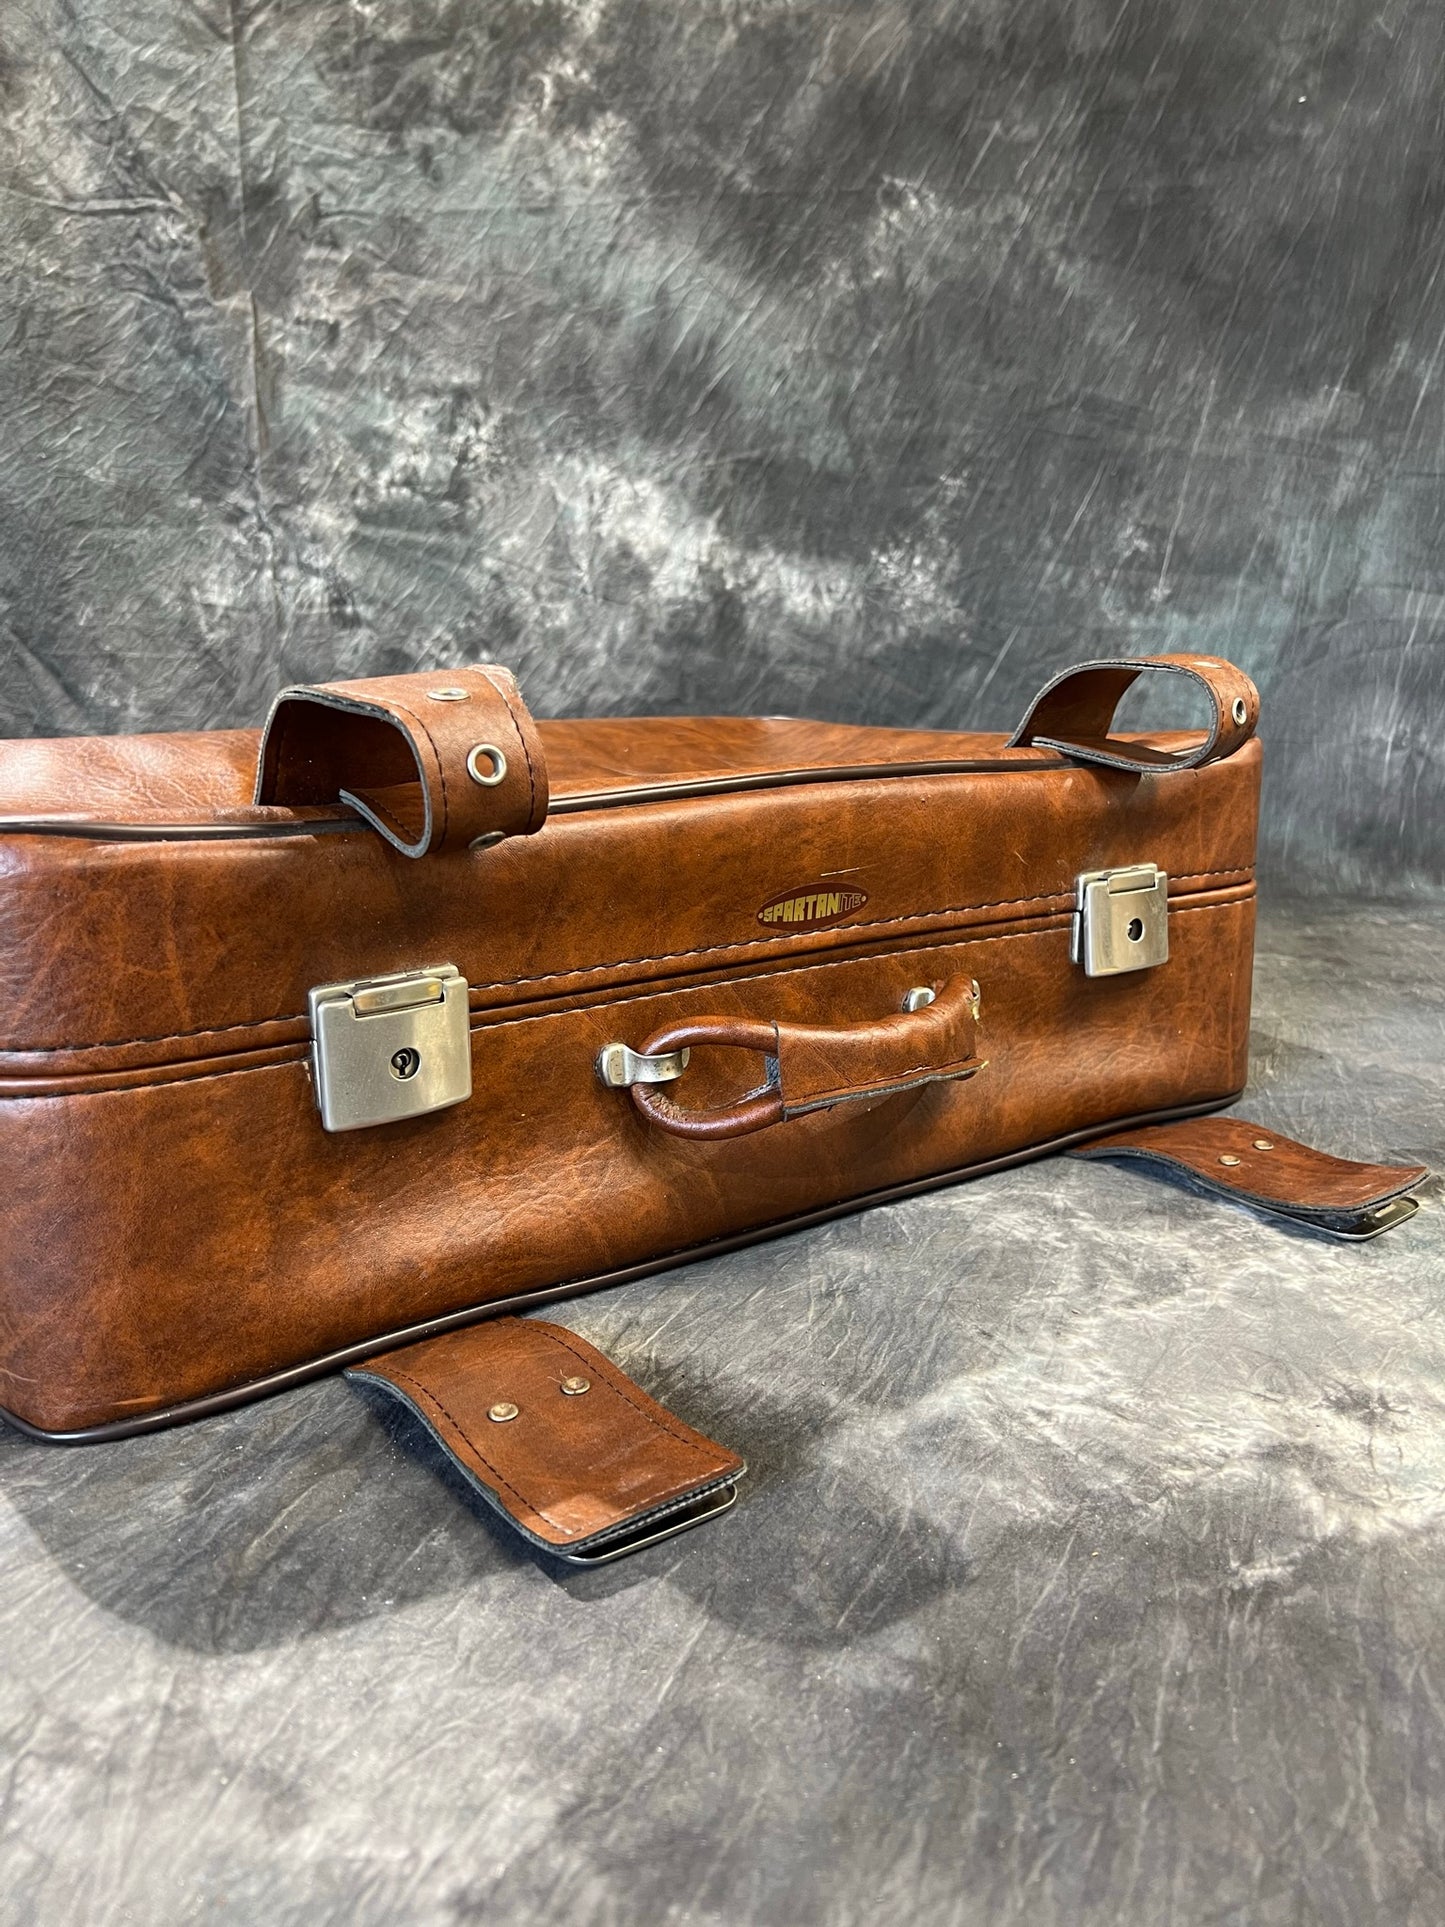 Vintage Brown Leather Suitcase Motor Luggage Retro Travel Trunk Boho Décor Display